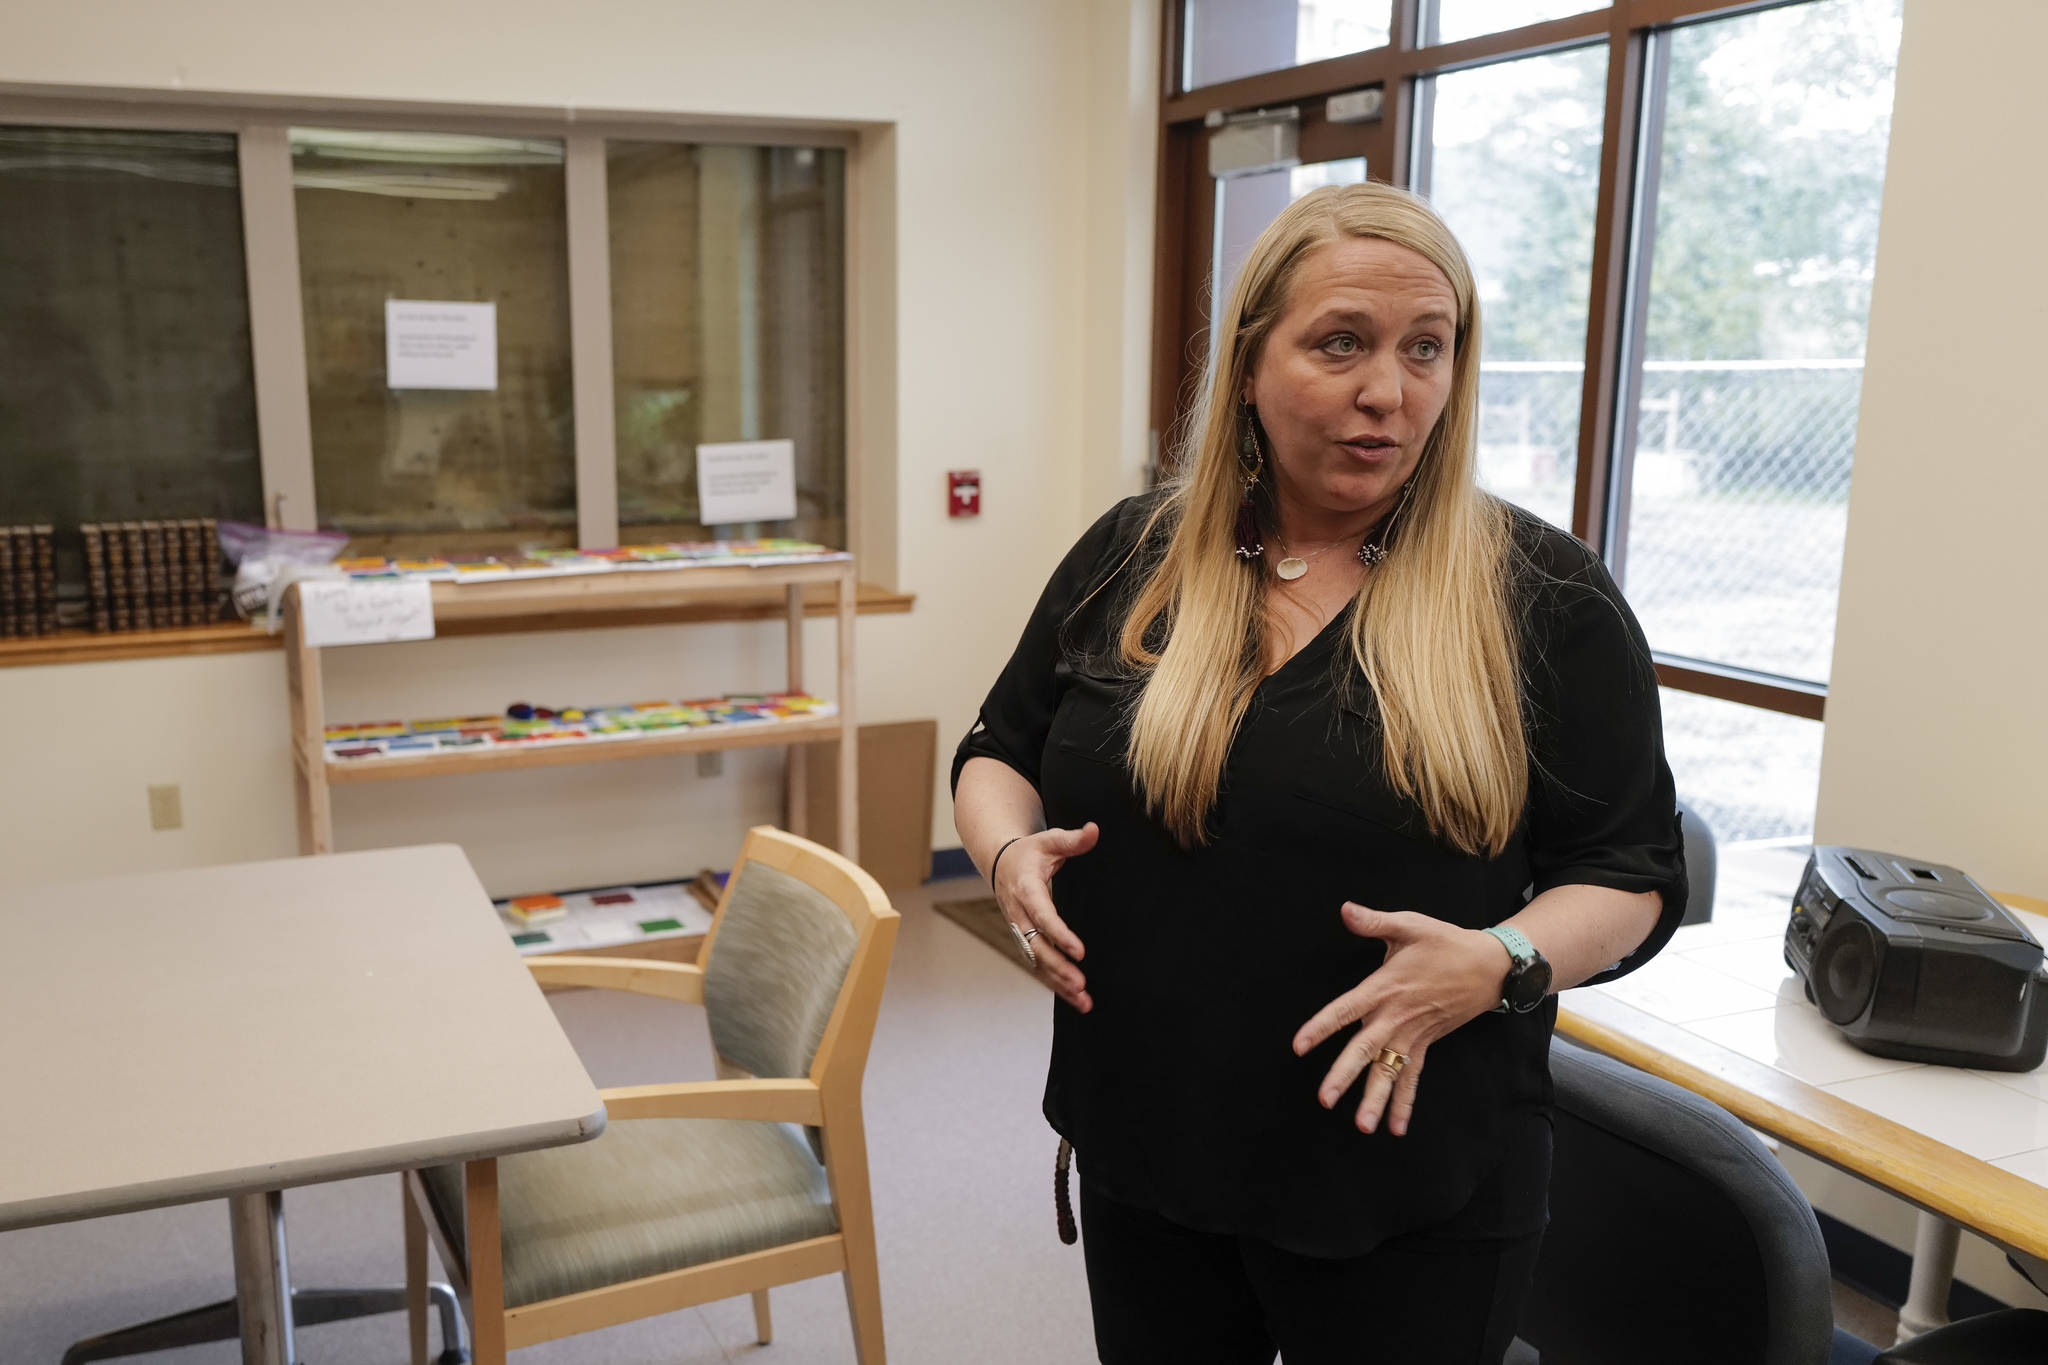 Dacia Davis, program manager for Juneau Housing First Collaborative’s Forget-Me-Not Manor, gives a tour of the facility on Wednesday, Sept. 11, 2019. It is the two-year anniversary of the project that provides housing and support services to chronically homeless adults who have struggled with alcohol and are high utilizers of emergency services within the City and Borough of Juneau. Phase II to build another 32 apartments is currently underway and will open late next year. (Michael Penn | Juneau Empire)